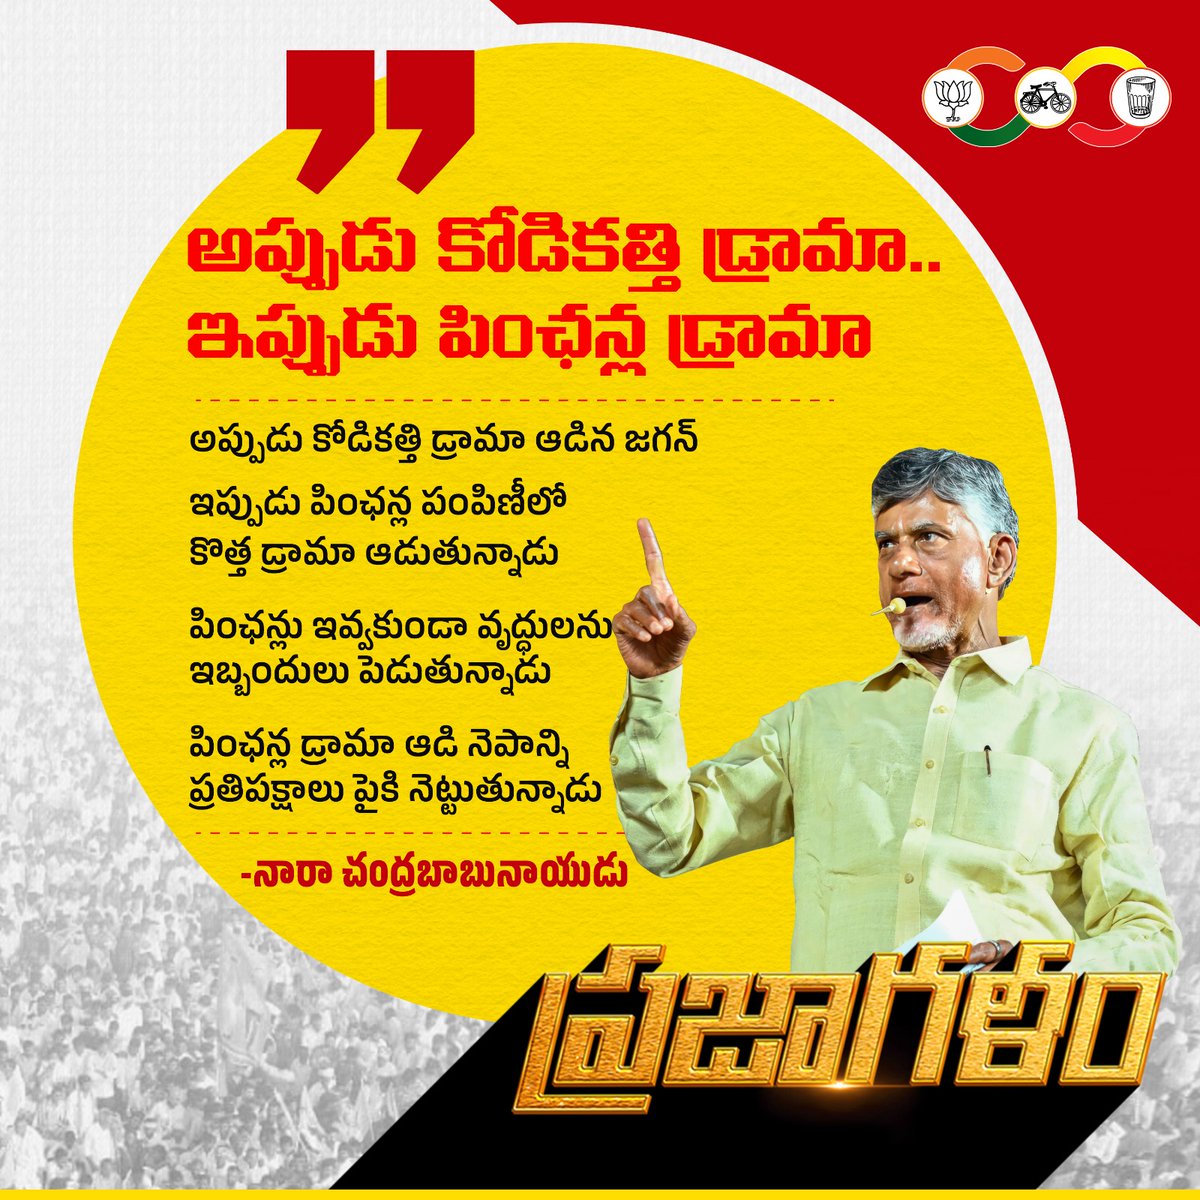 To the end of anarchy
To the beginning of the golden age
The public is the beginning of the progress of Navyandhra
#BabuForJanaRajyam